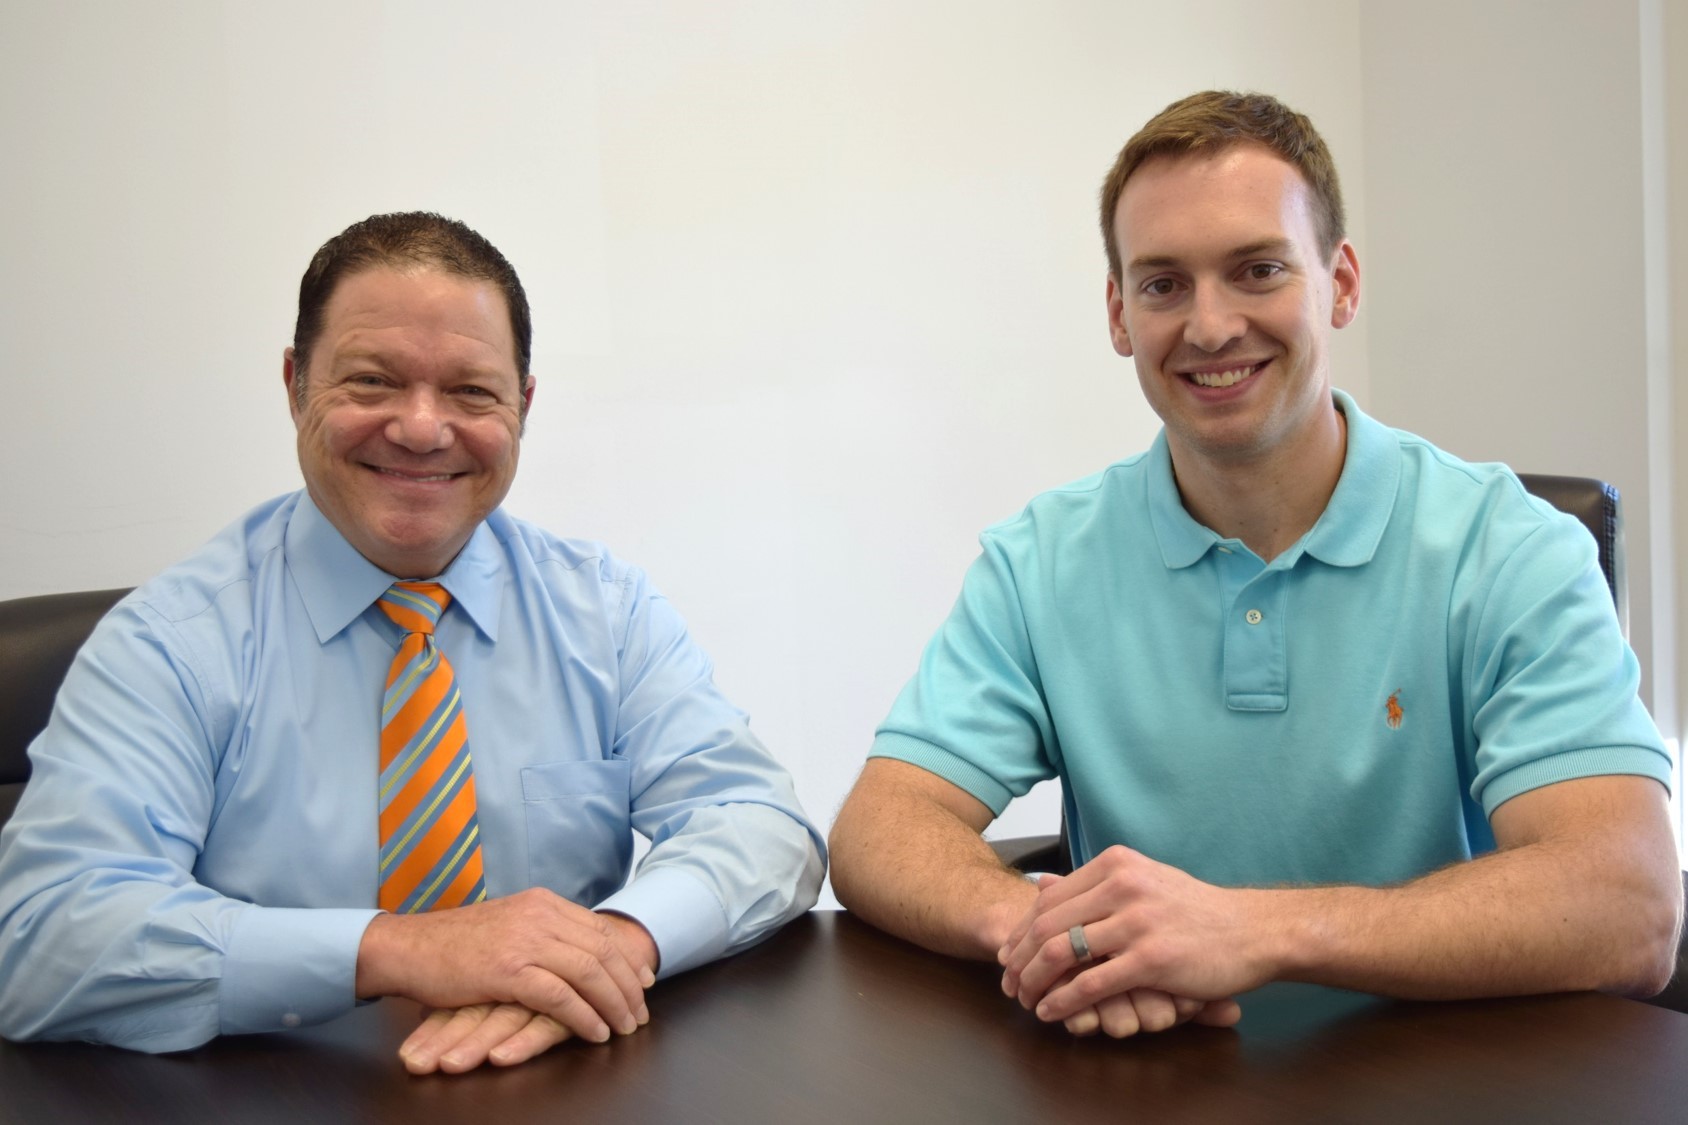 From left to right: J Louis Schlegel IV, global vice president of sales, and Rick Clark, vice president of operations. (Photo courtesy Business Wire)